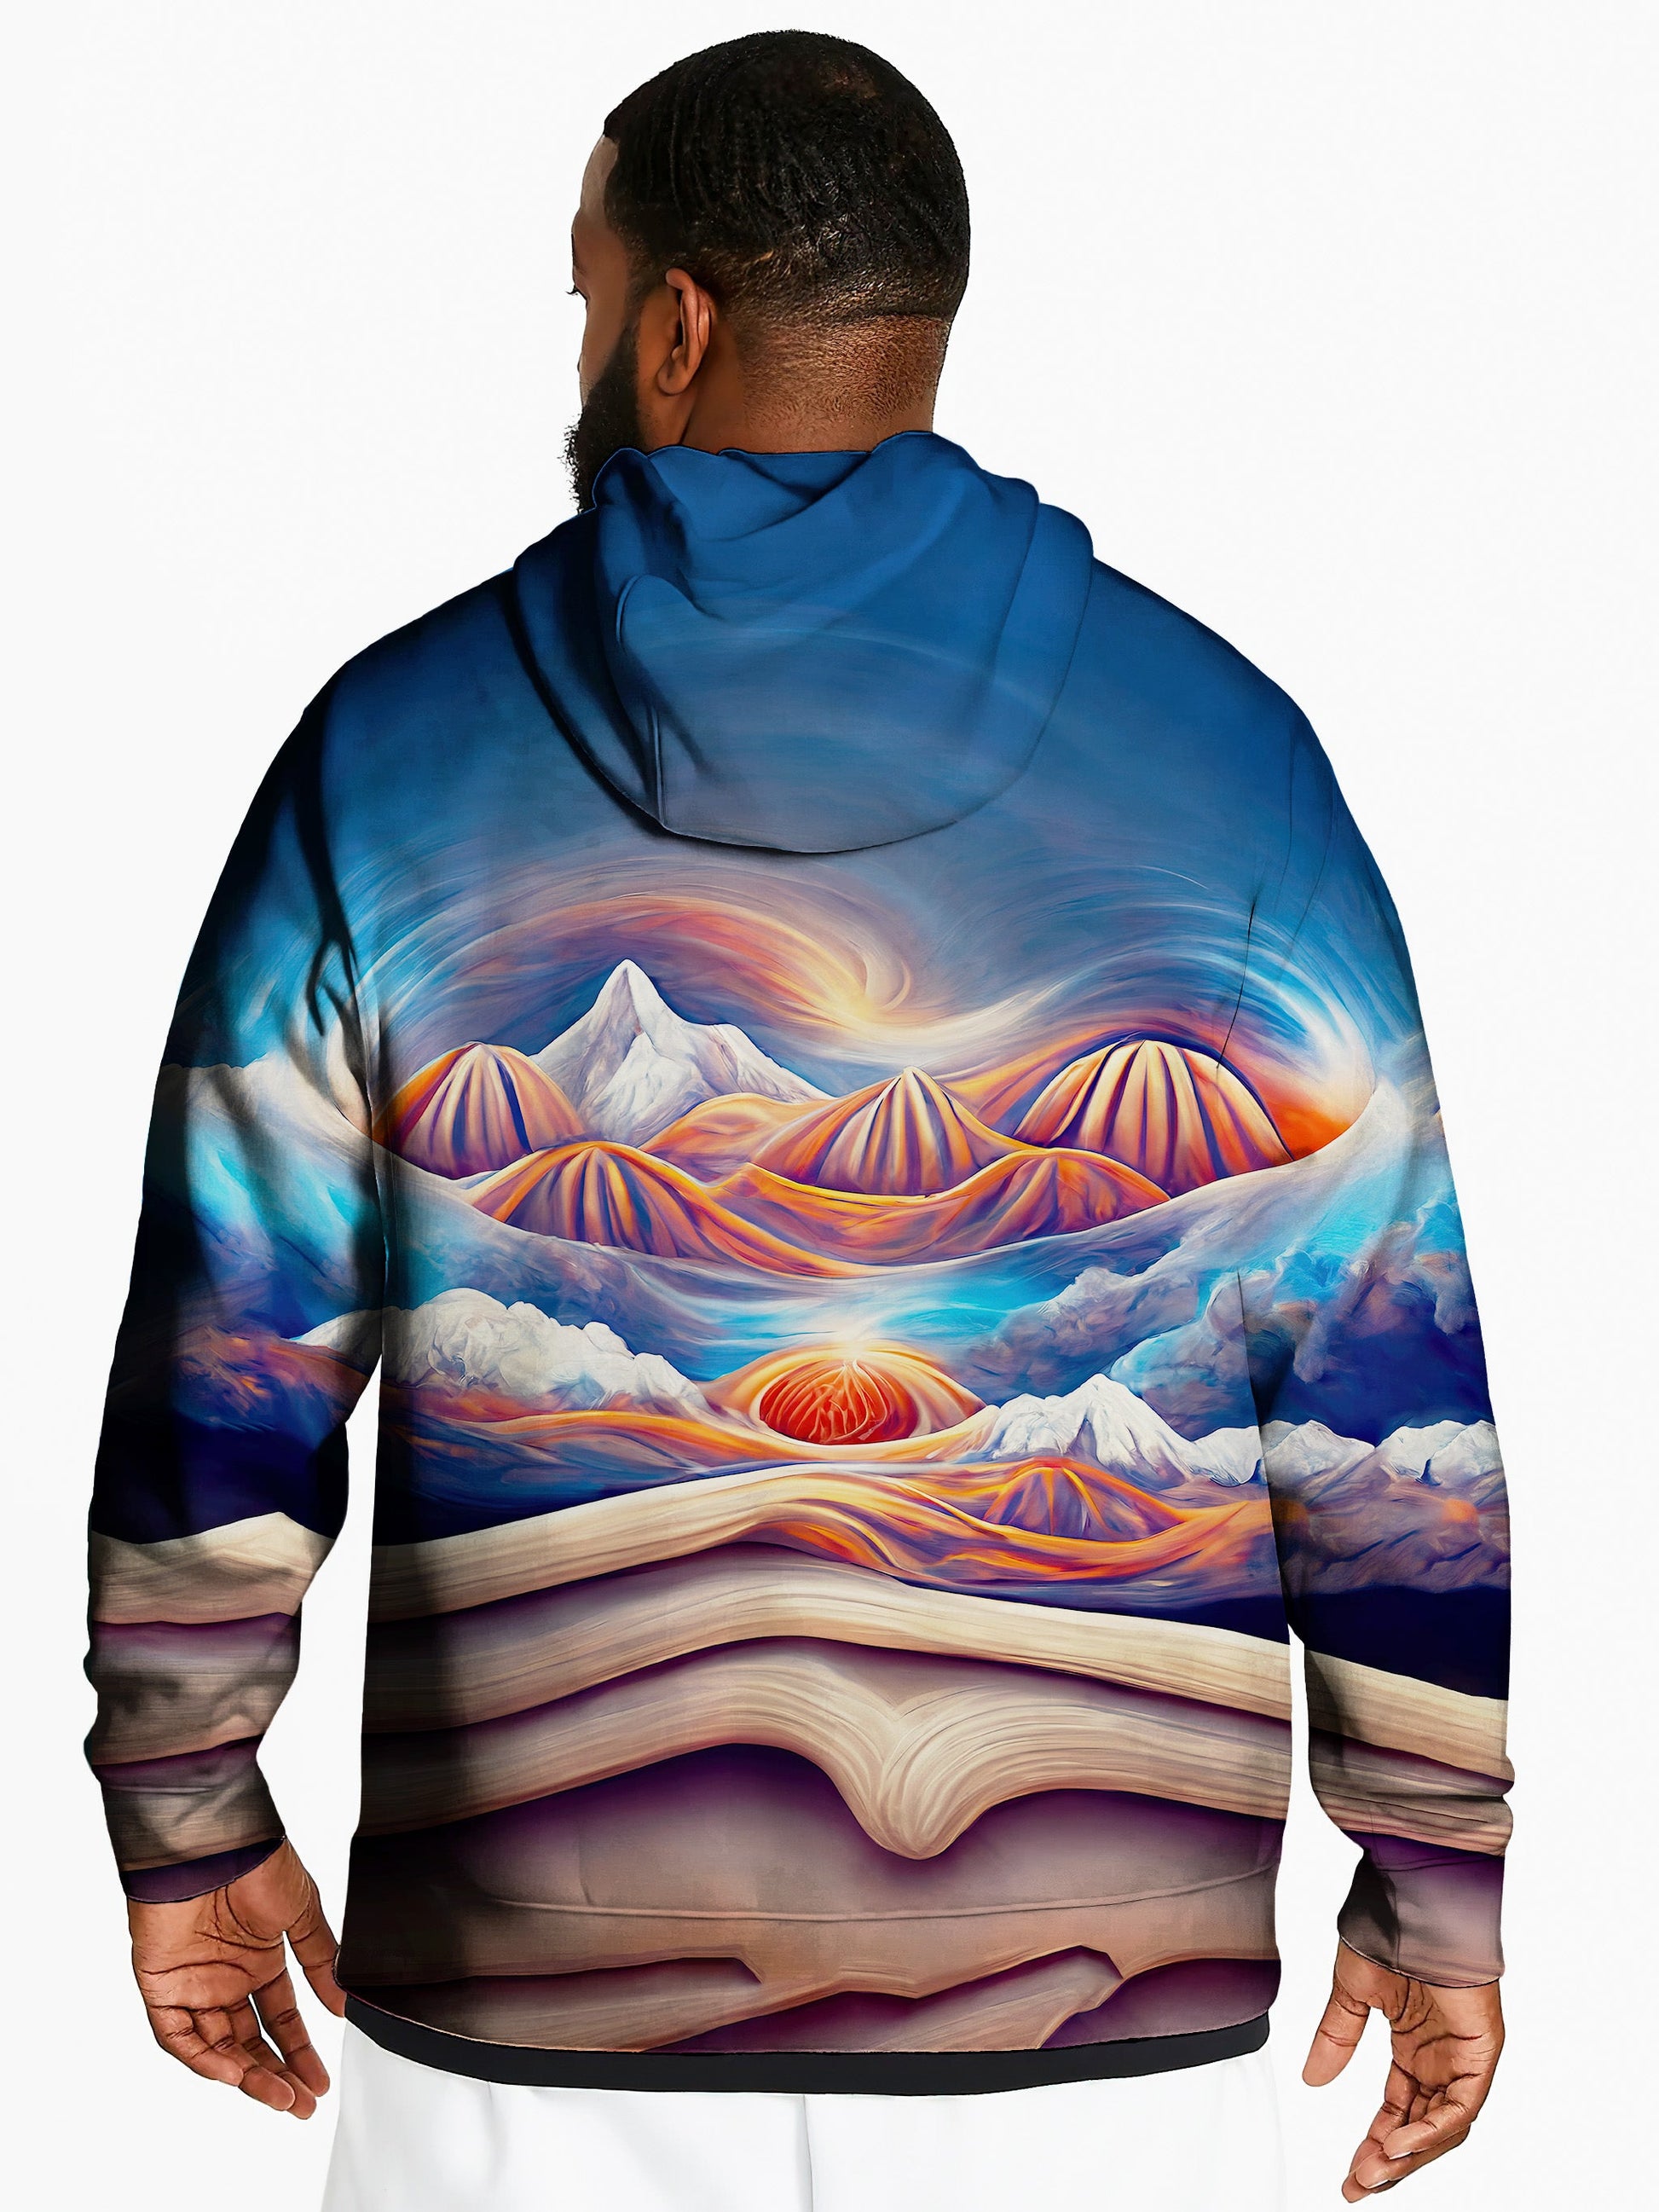 Exalted Eternity Unisex Pullover Hoodie - EDM Festival Clothing - Boogie Threads